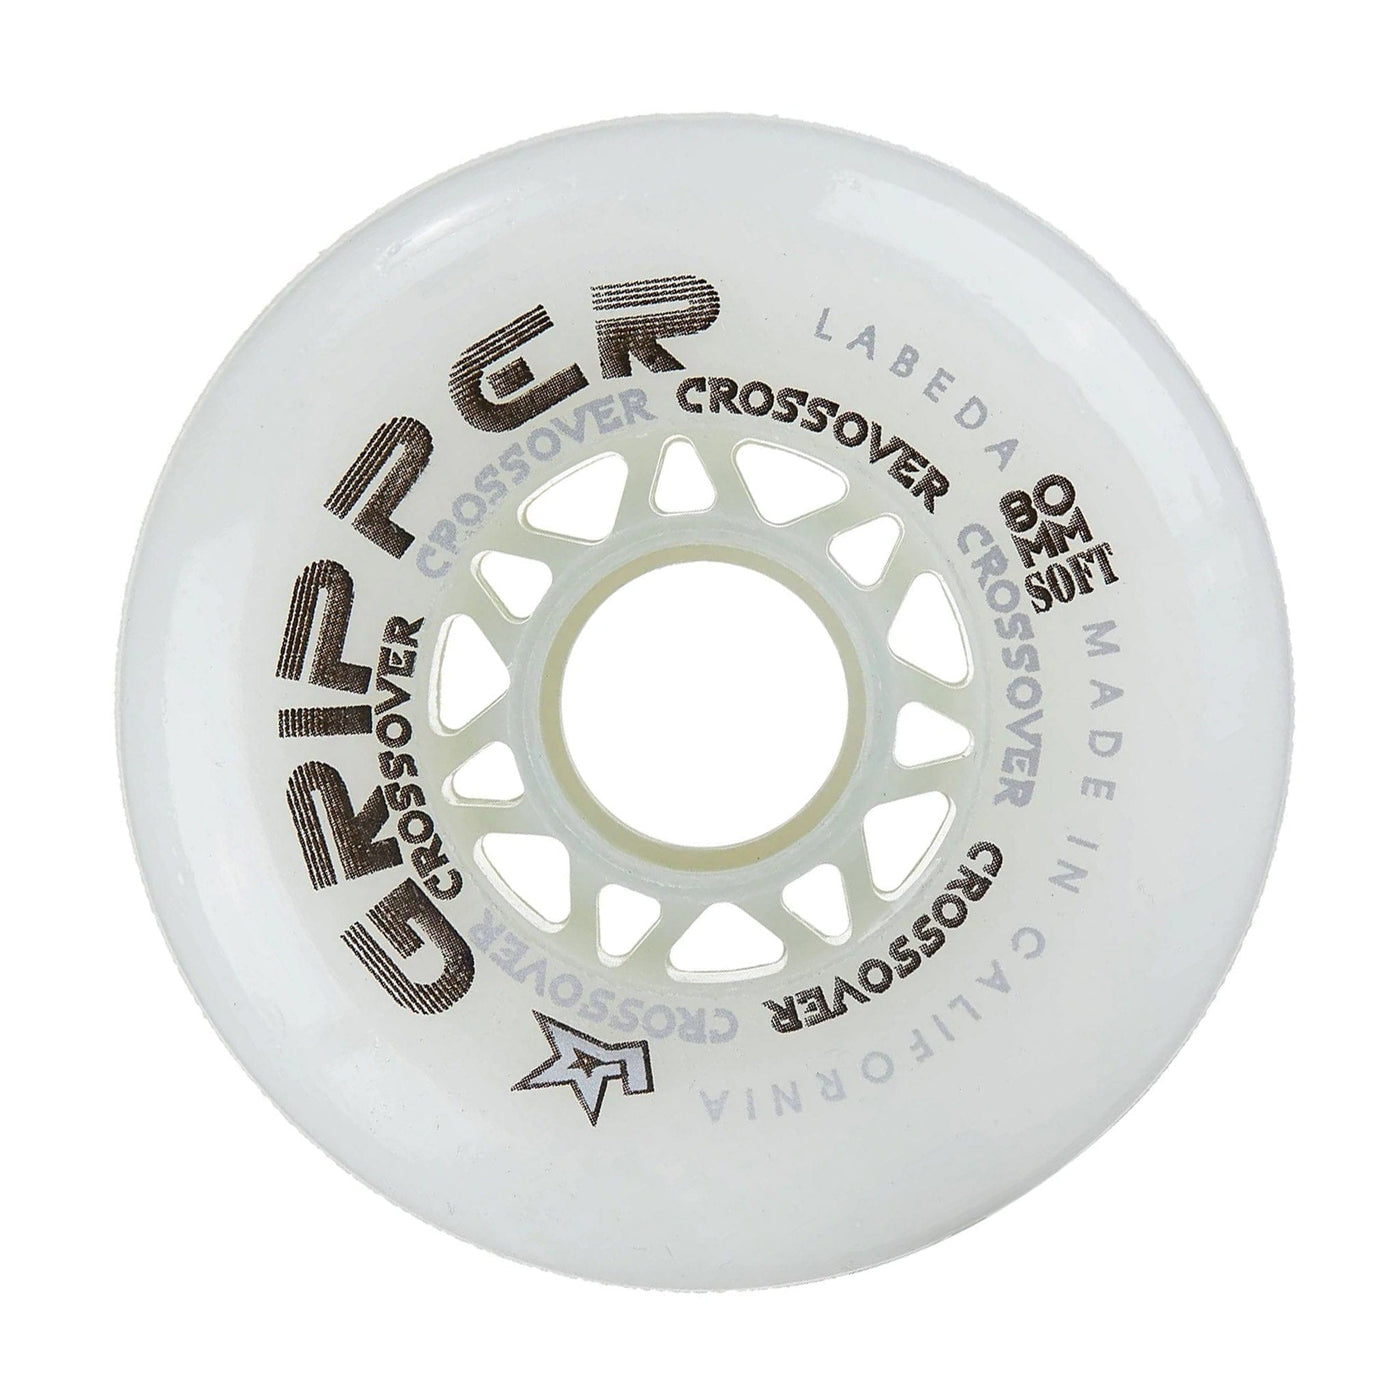 Labeda Gripper Roller Hockey Wheels - White (76A) - The Hockey Shop Source For Sports